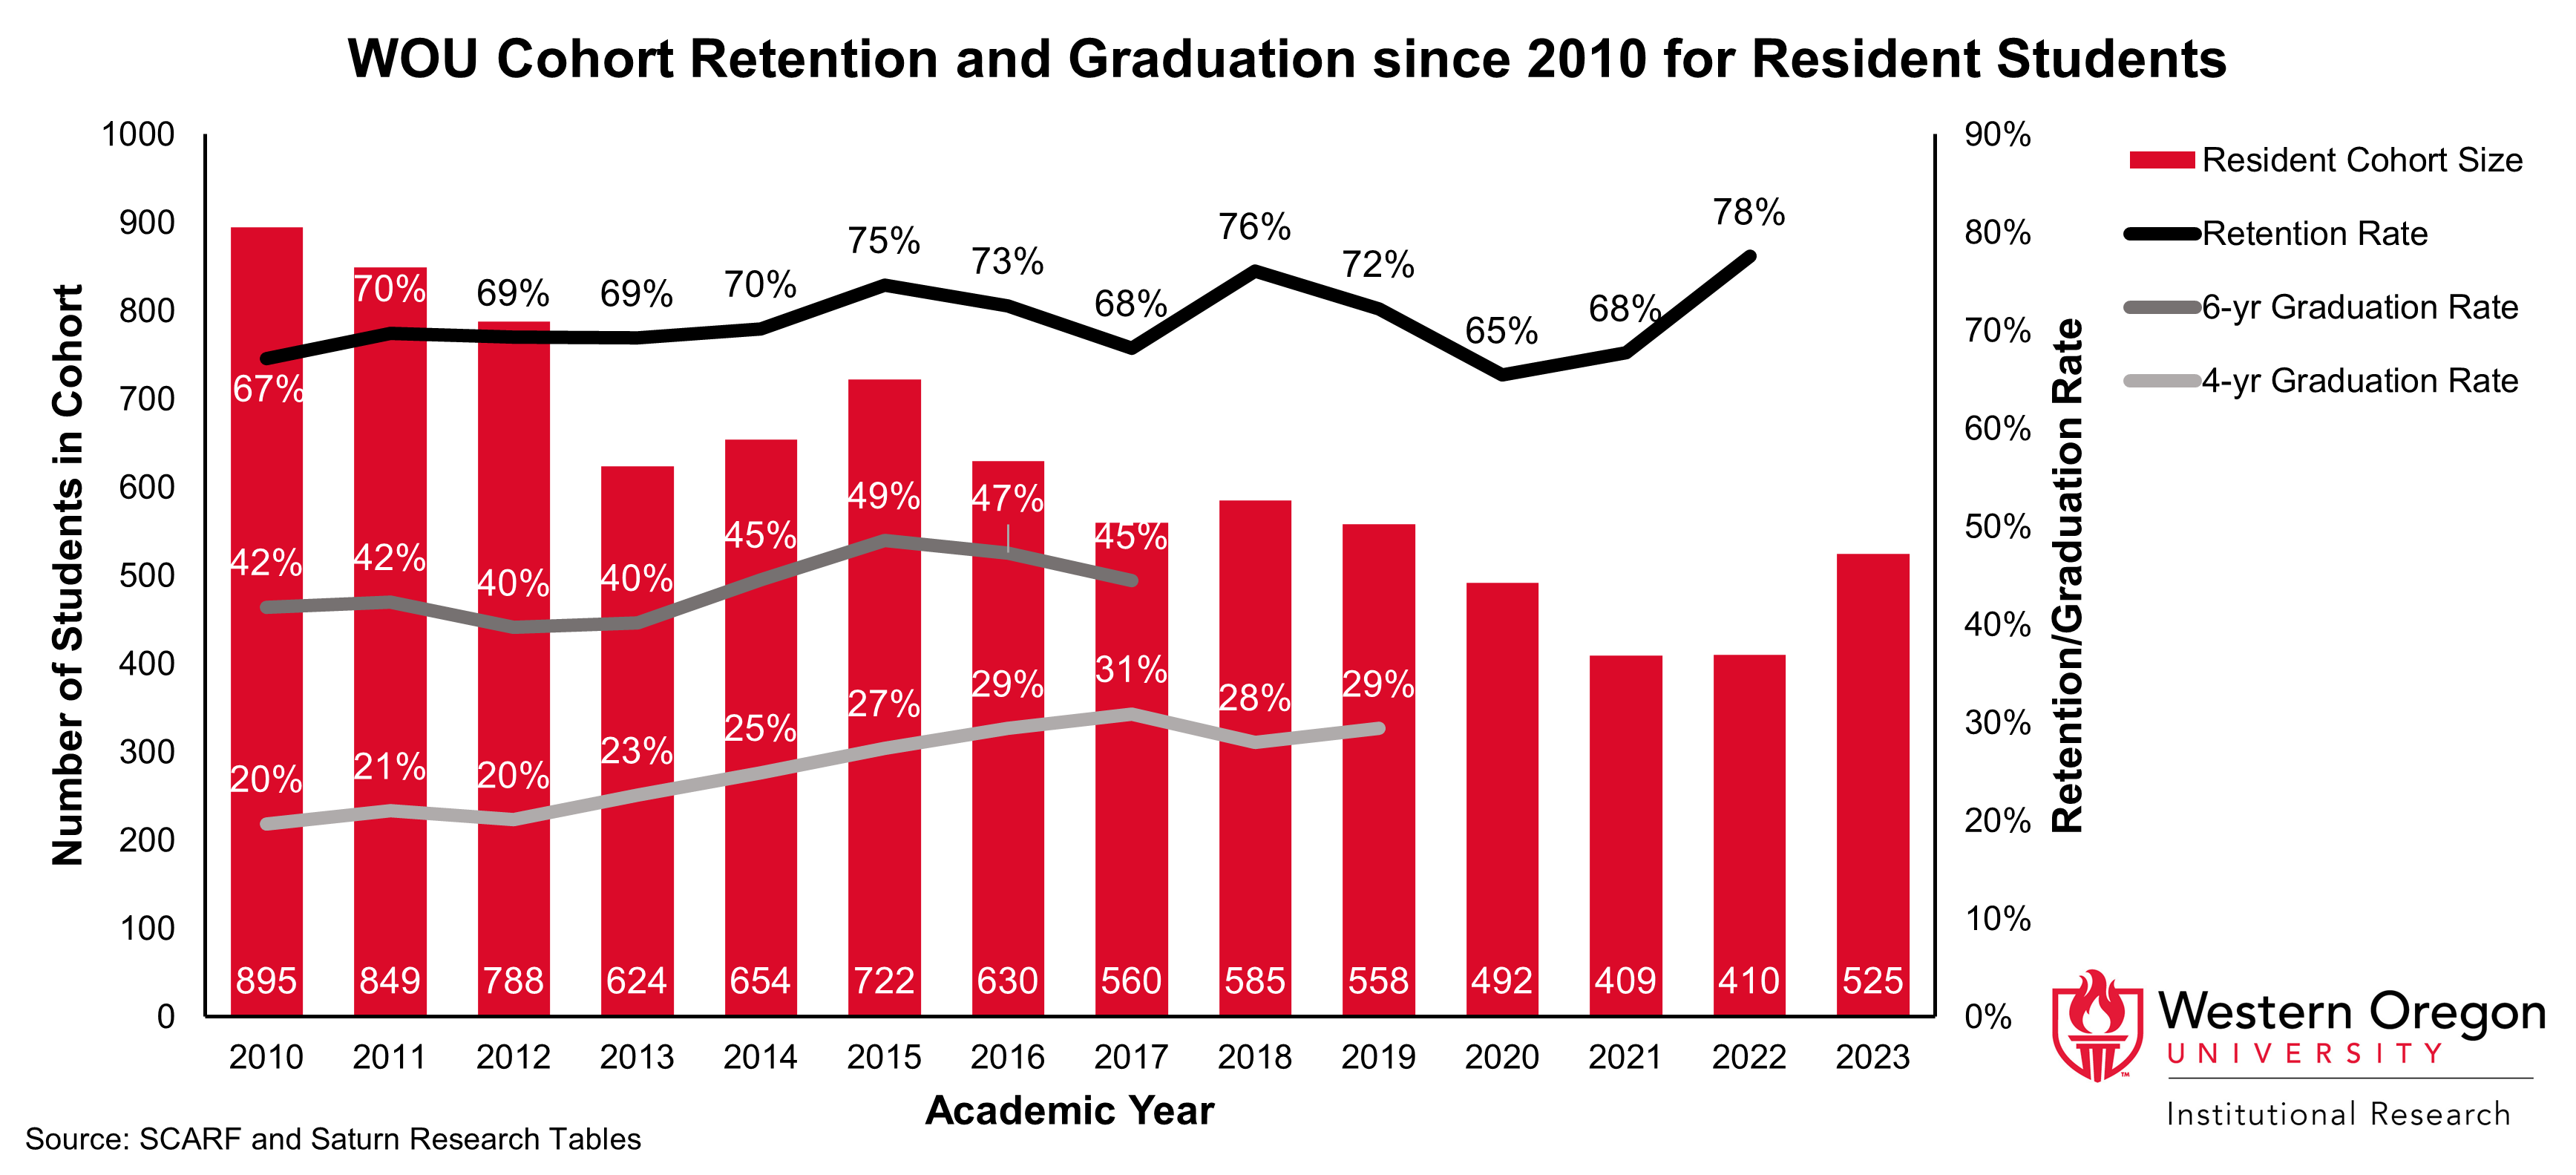 Bar and line graph of retention and 4- and 6-year graduation rates since 2010 for WOU students that have residency status, showing that graduation and retention rates have increased overall.